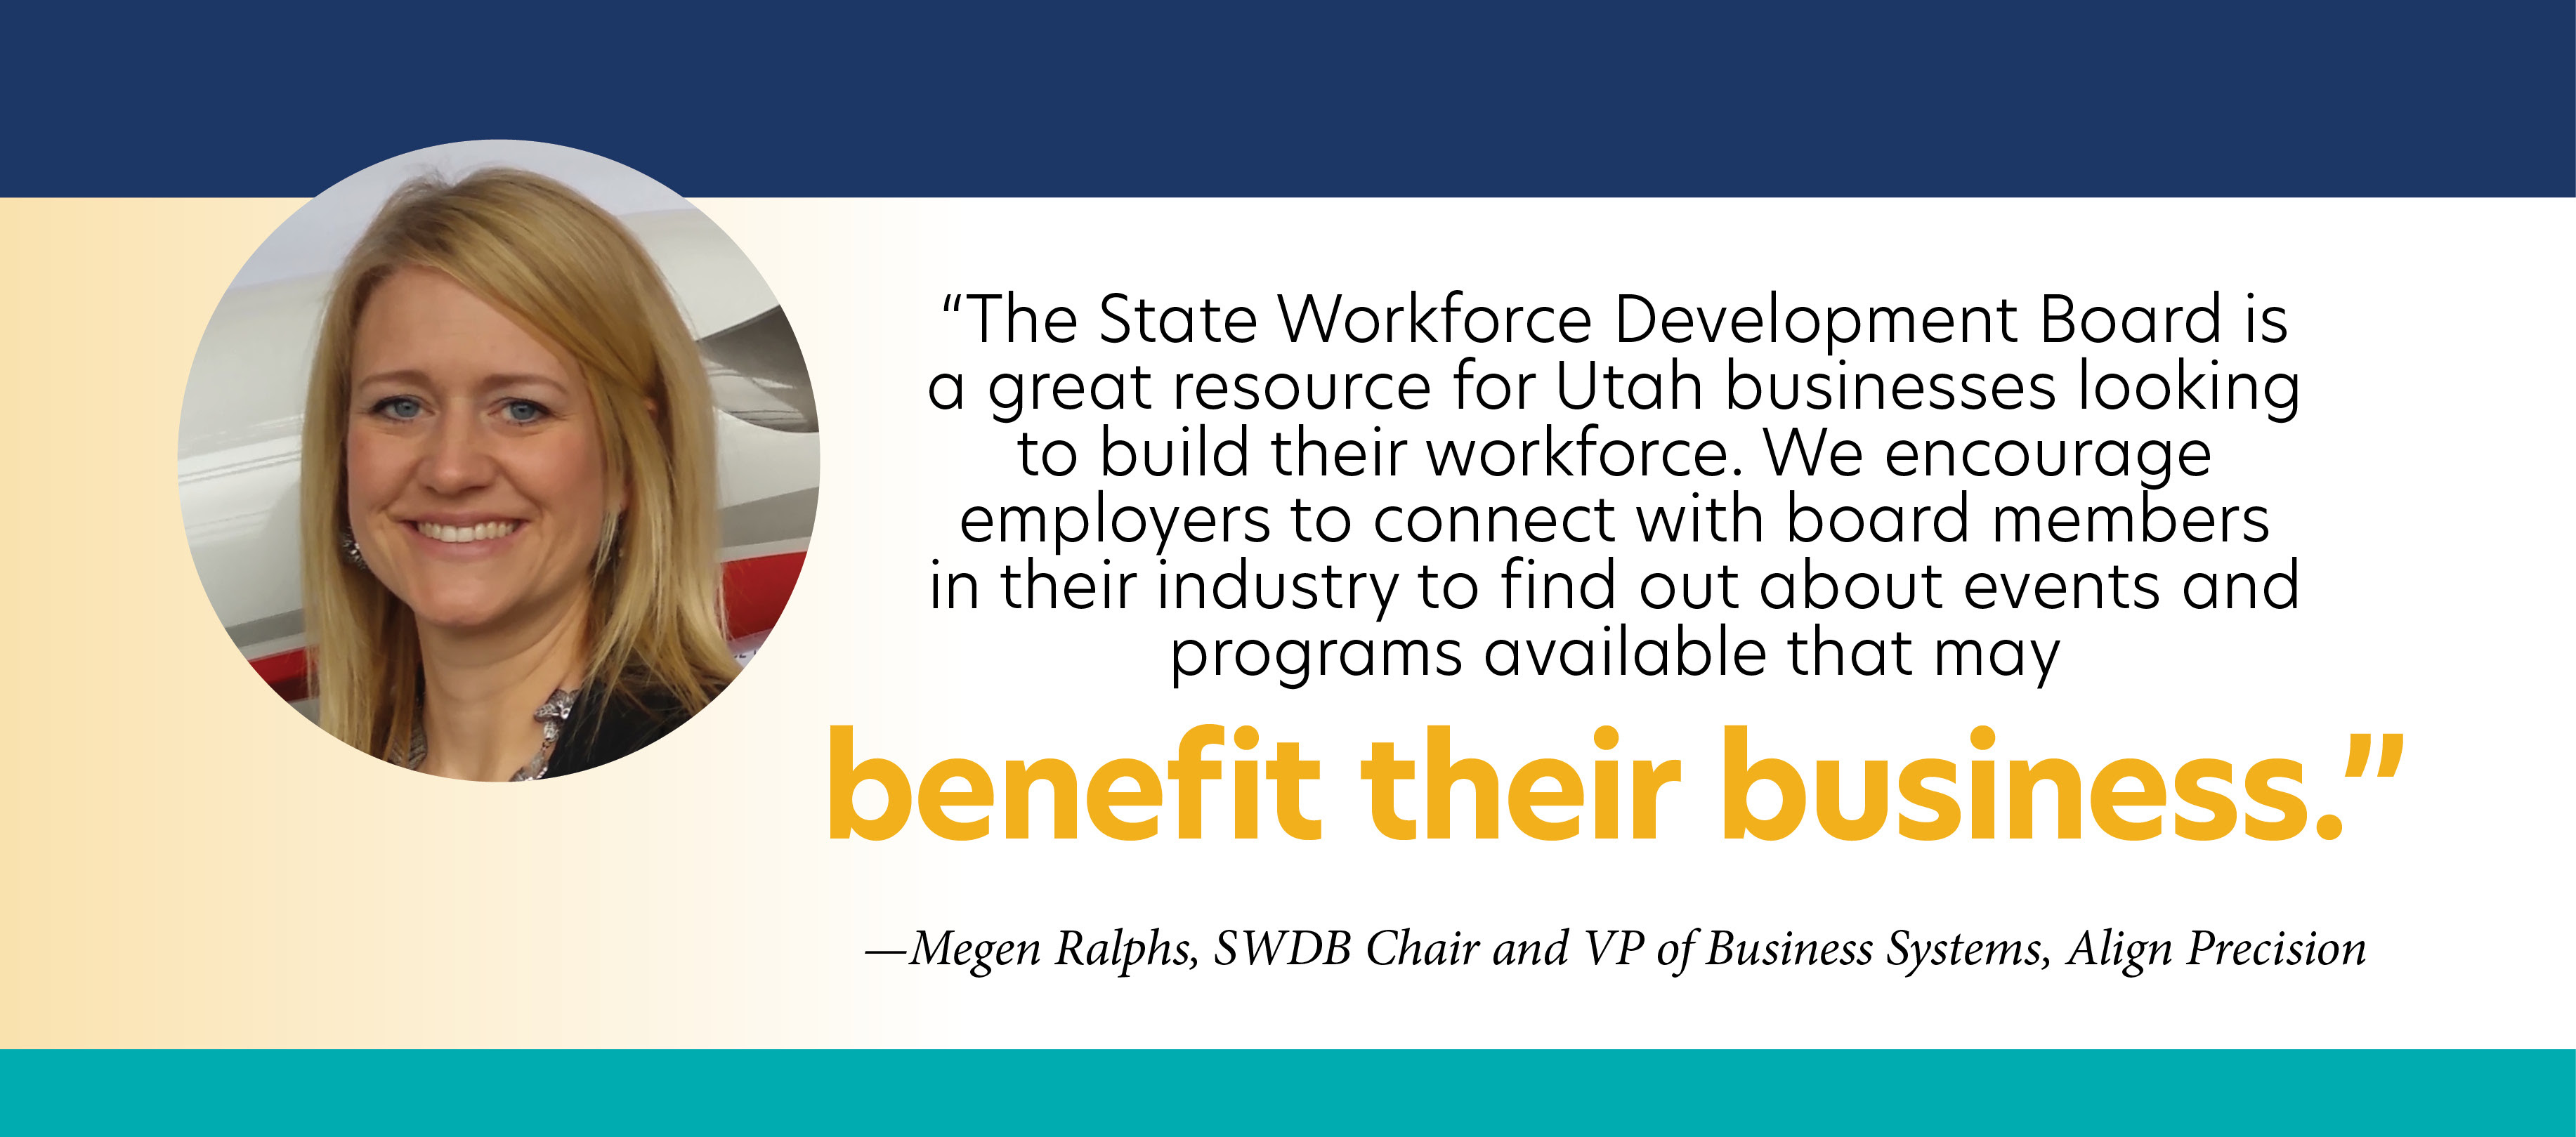 "The State Workforce Development Board is a great resource for Utah businesses looking to build their workforce. We encourage employers to connect with board members in their industry to find out about events and programs available that may benefit their business." - Megen Ralphs, SWDB Chair and VP of Business Systems, Align Precision